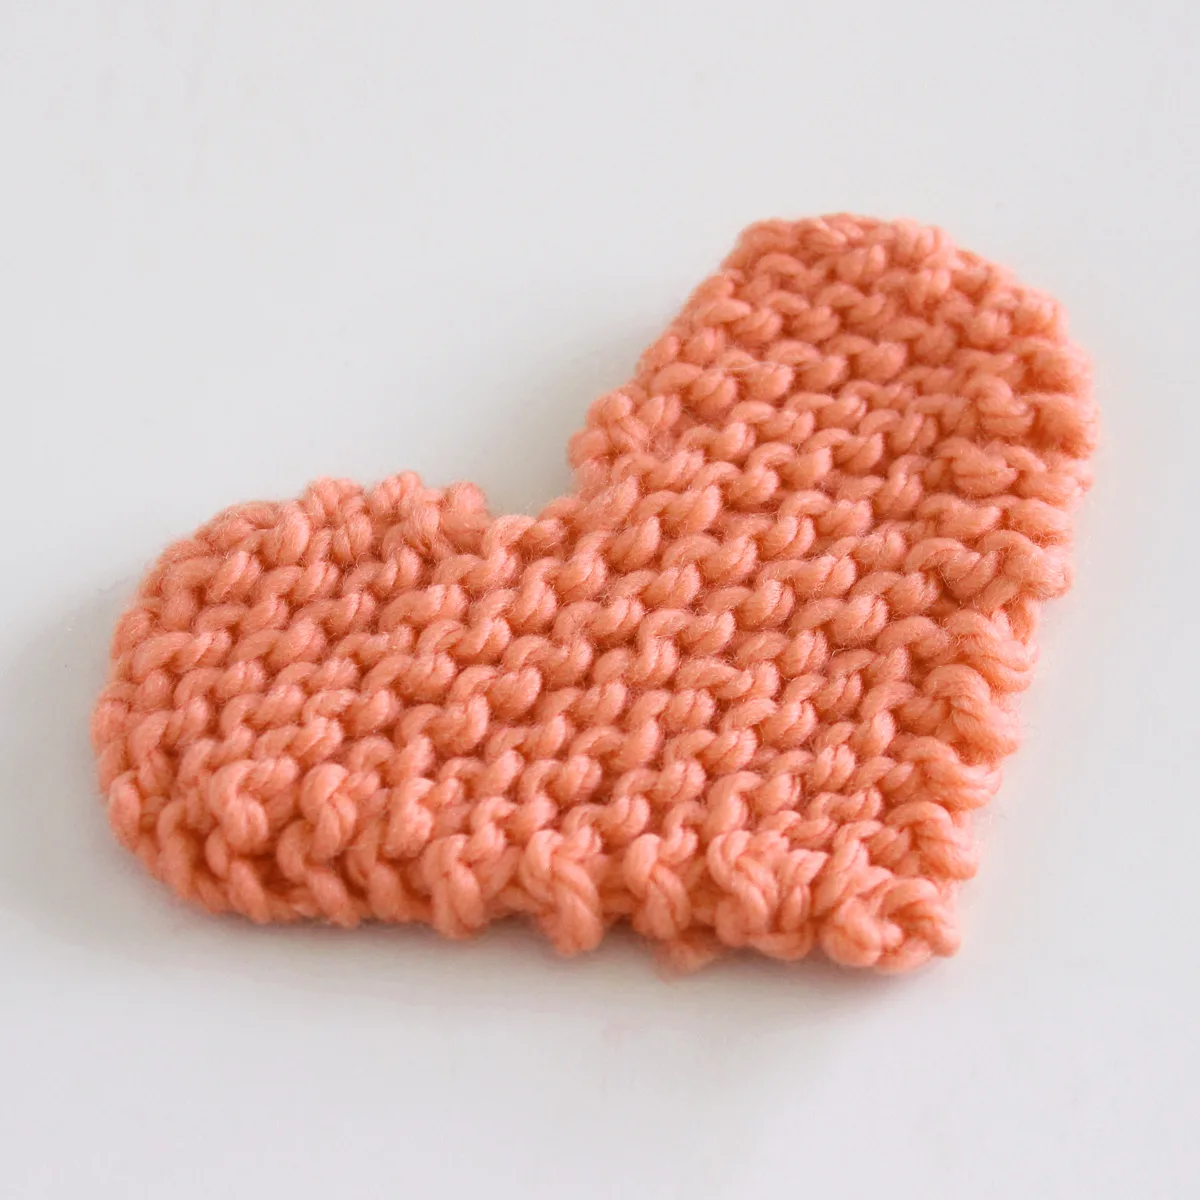 Knitted heart shape in garter stitch with orange color yarn.